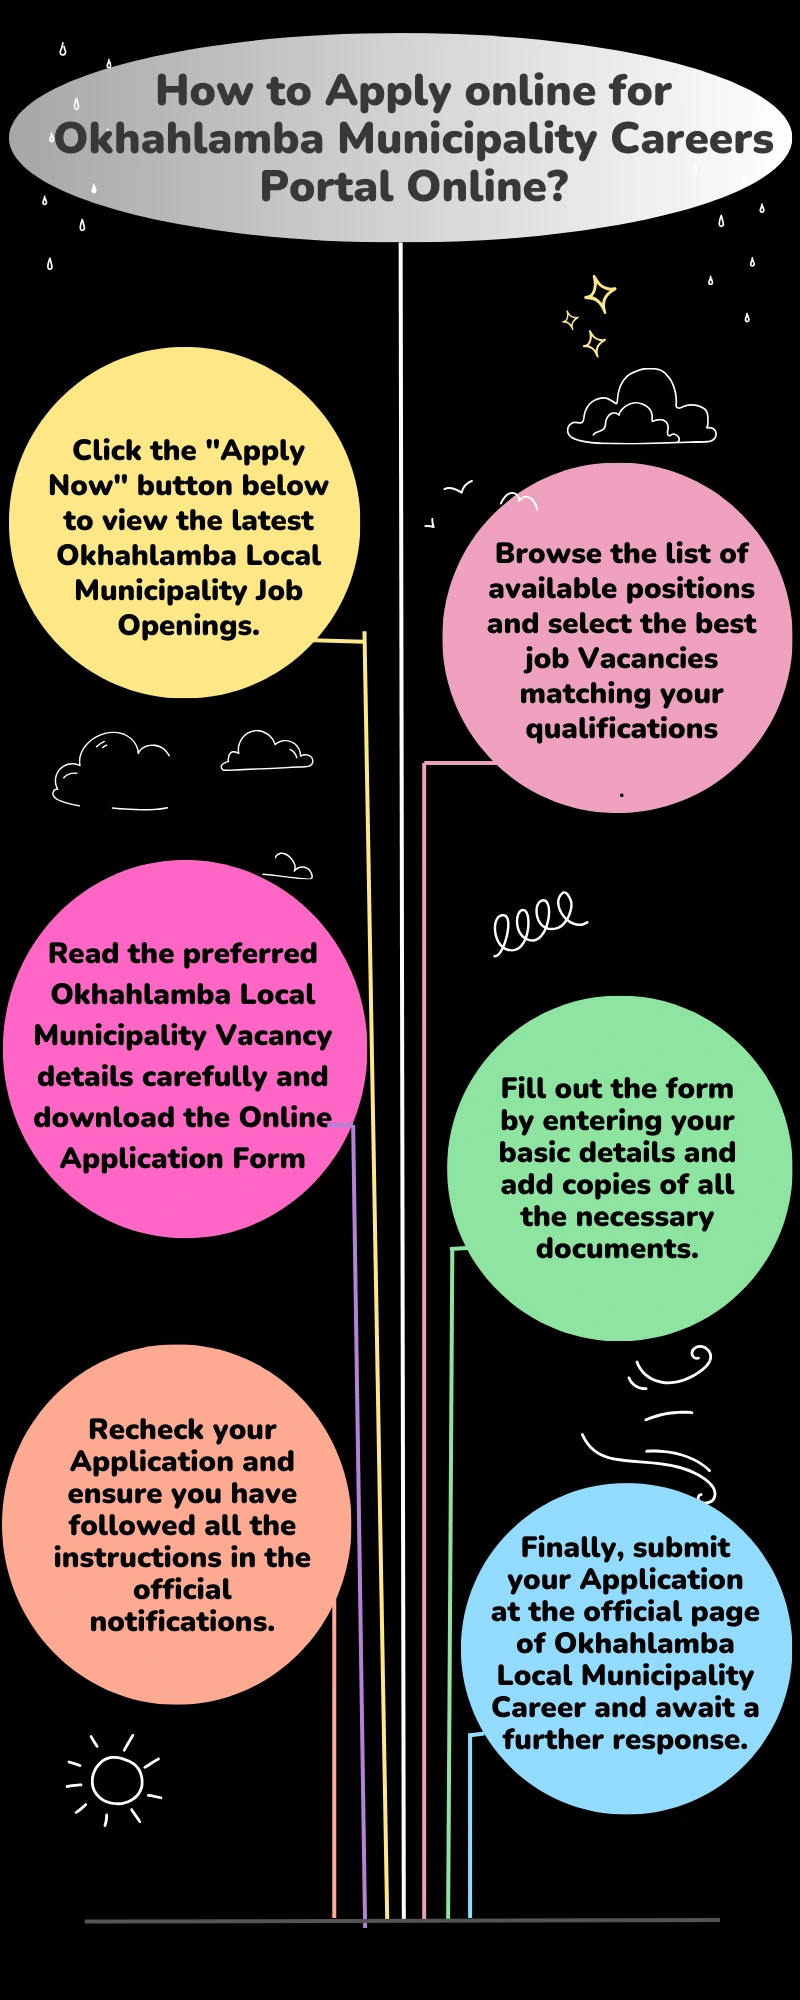 How to Apply online for Okhahlamba Municipality Careers Portal Online?